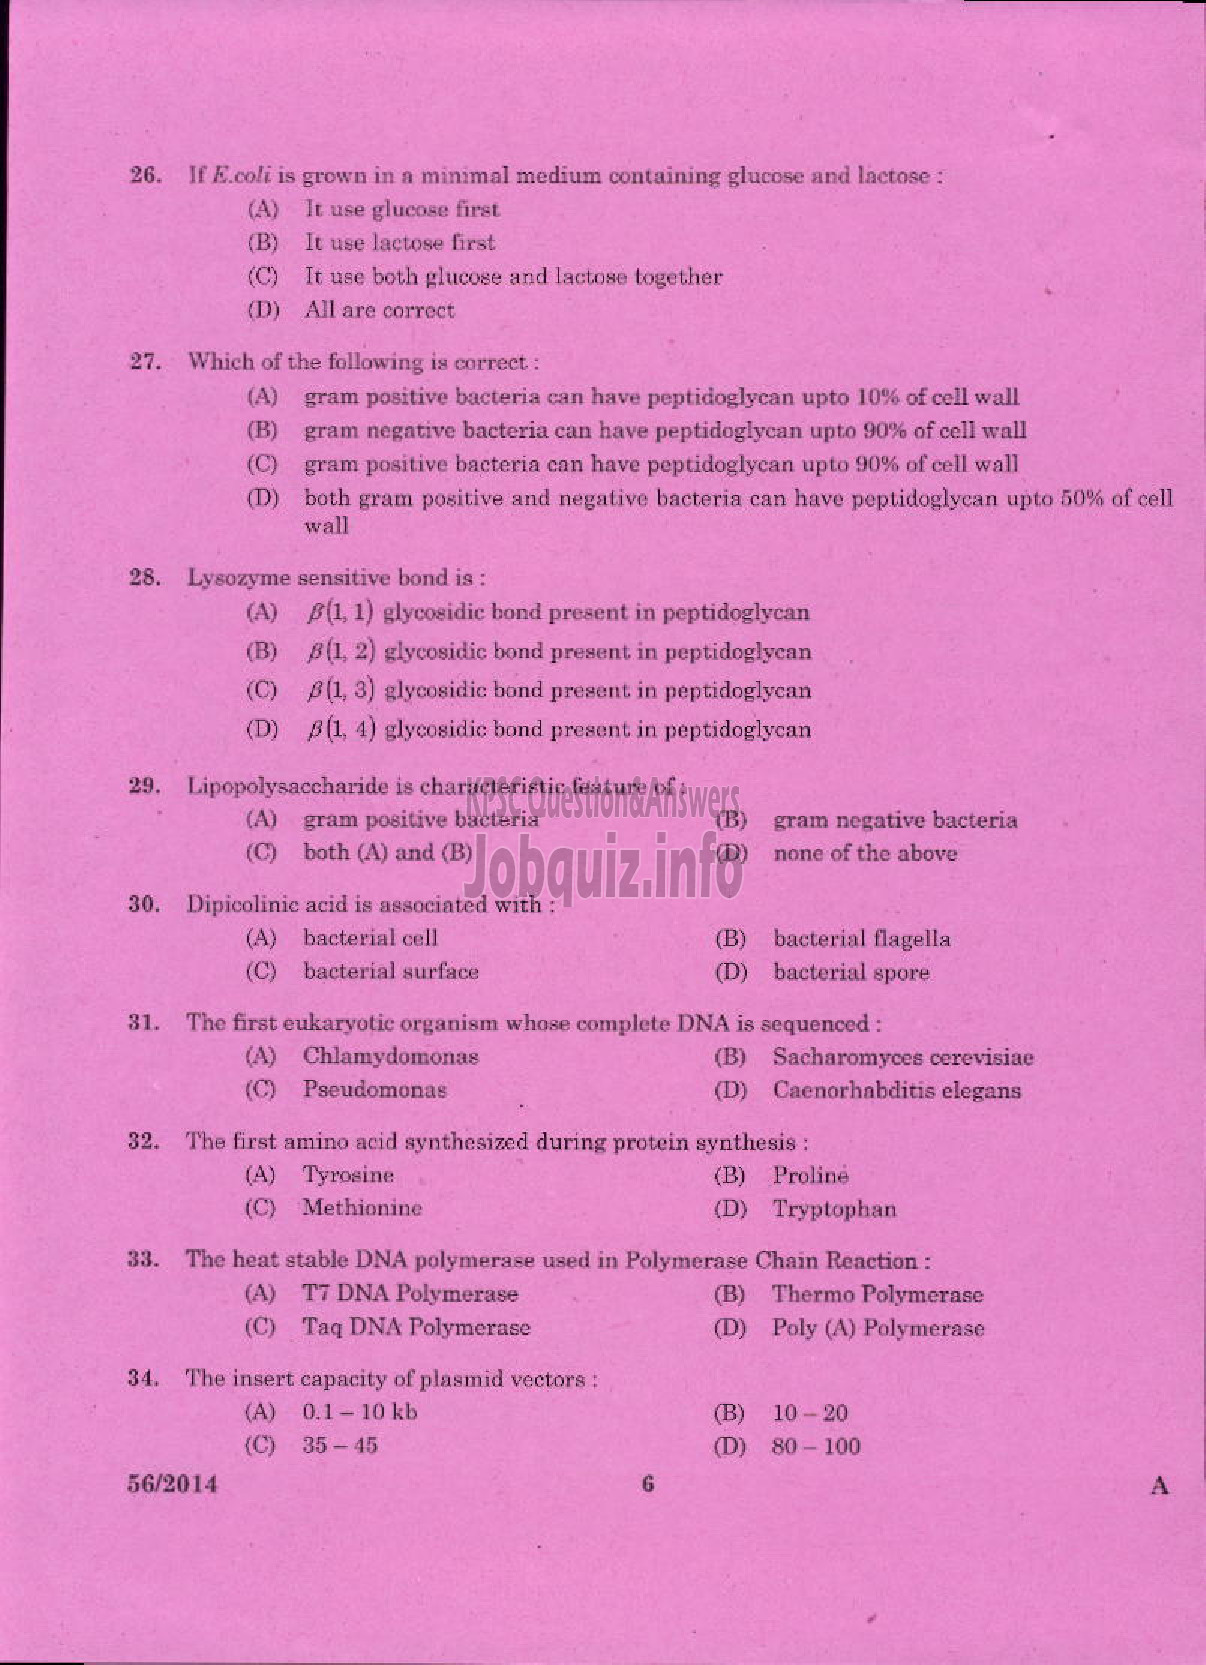 Kerala PSC Question Paper - LECTURER IN ZOOLOGY KERALA COLLEGIATE EDUCATION-4